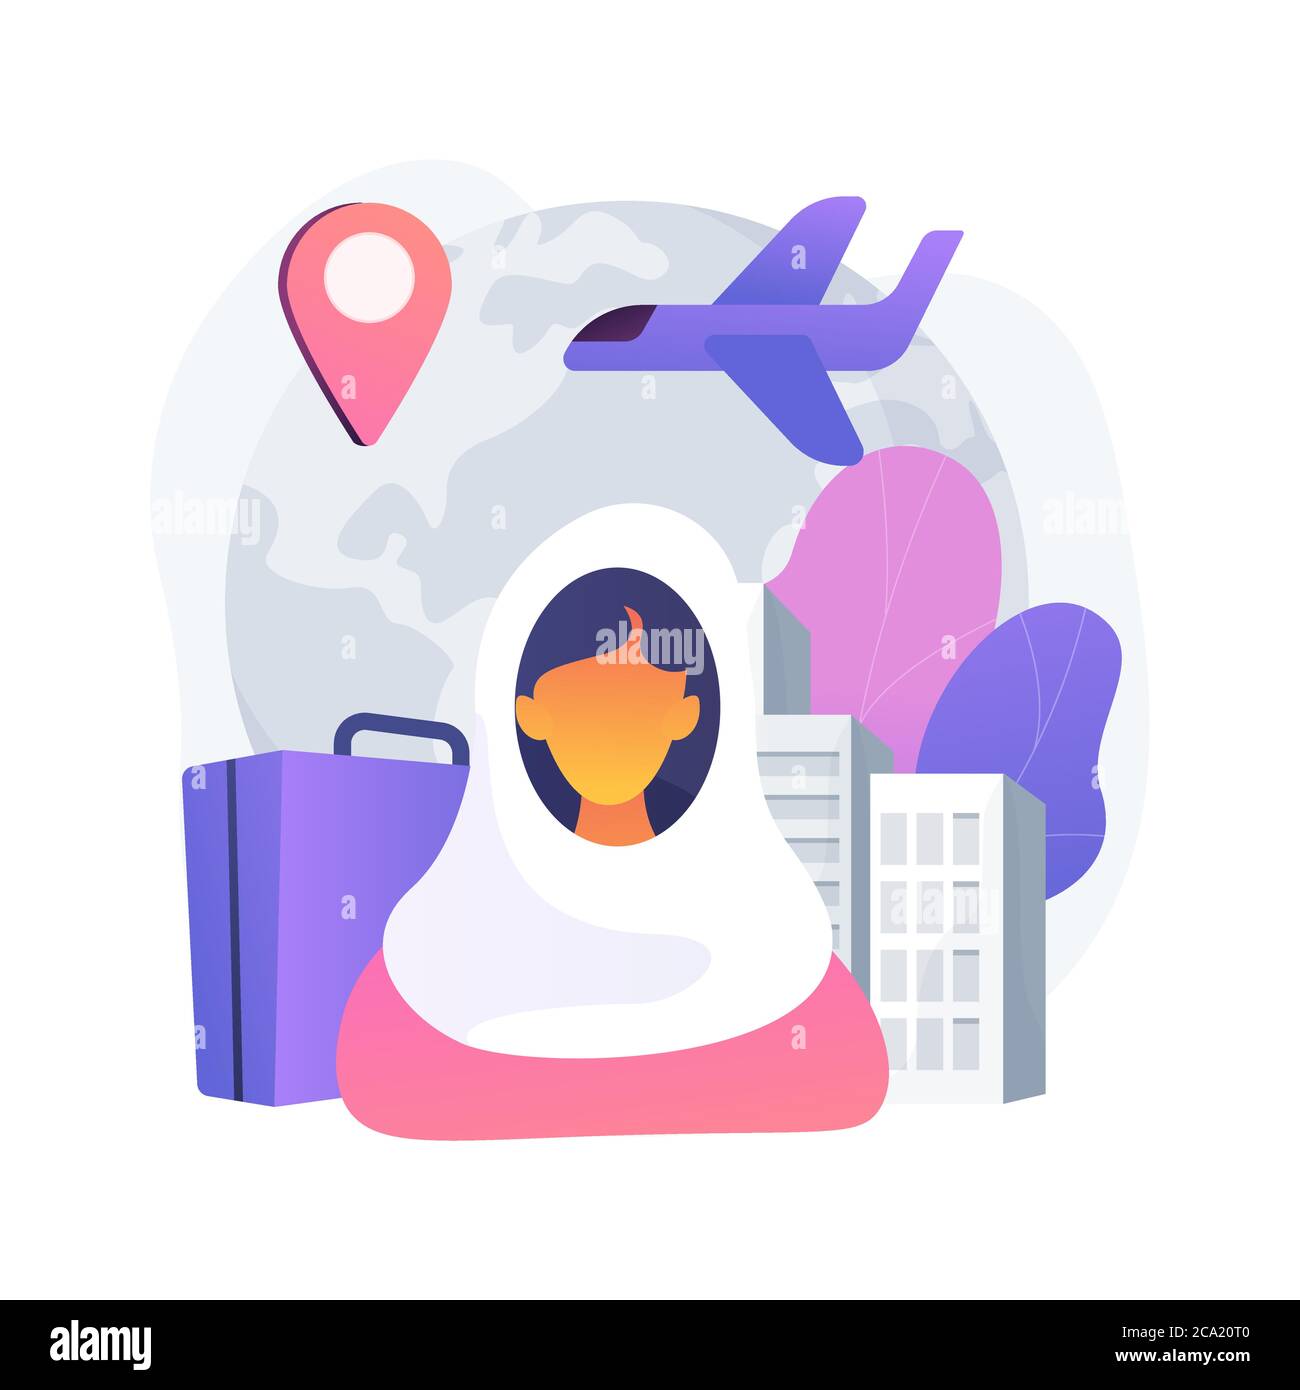 Female migrant abstract concept vector illustration. Stock Vector